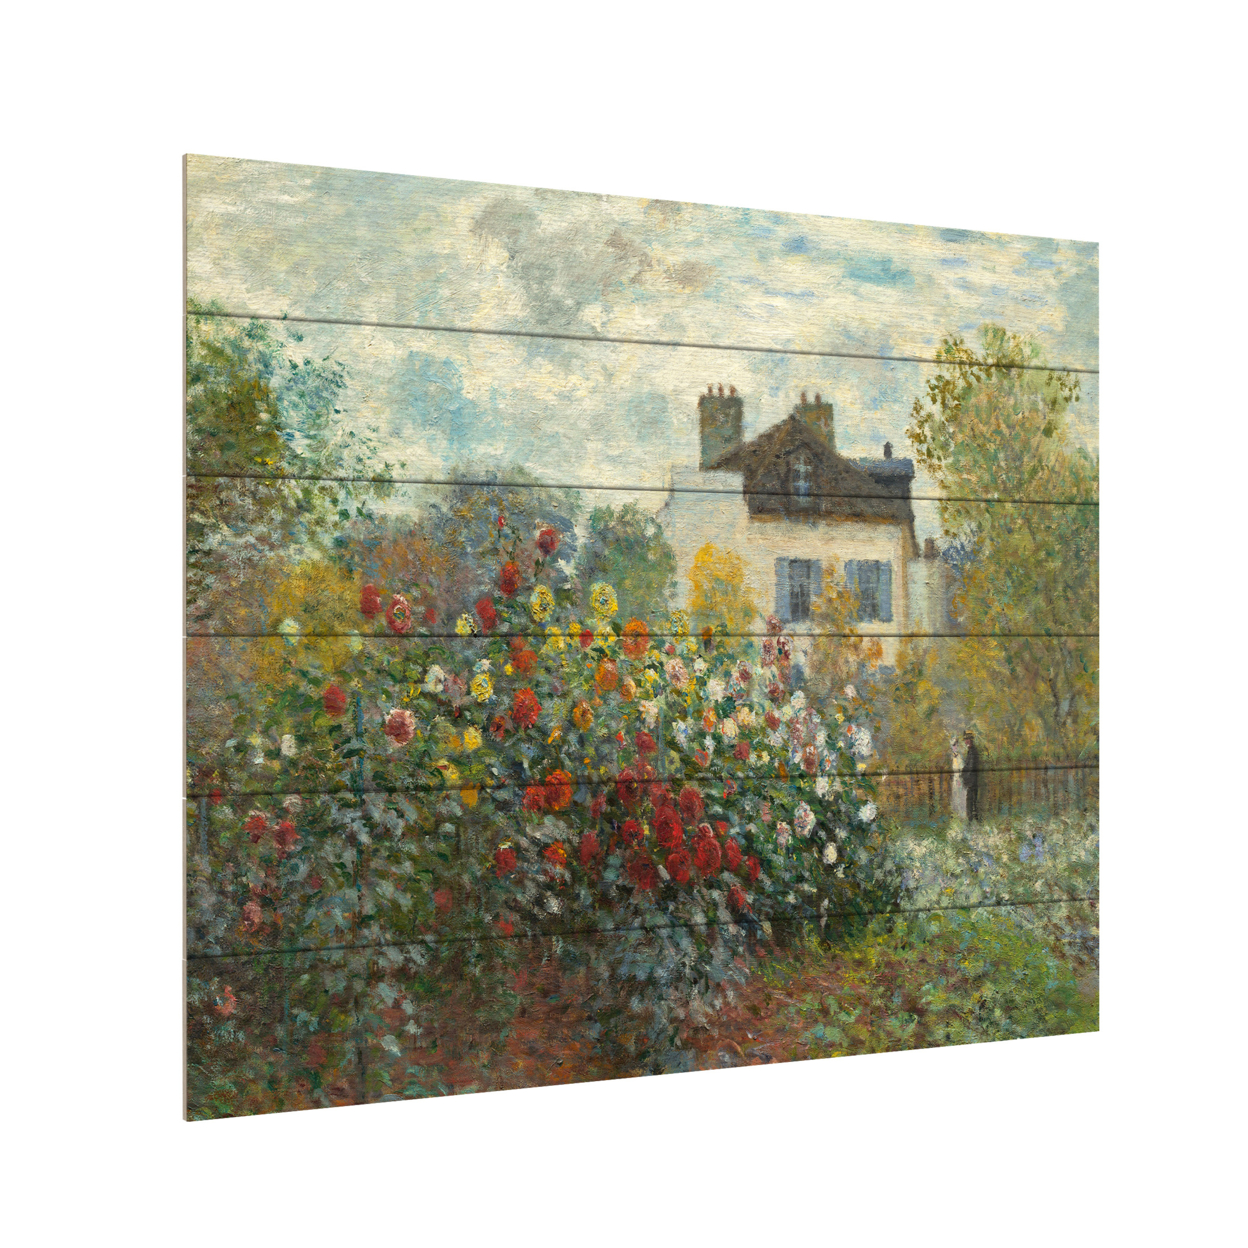 Wooden Slat Art 18 X 22 Inches Titled The Artists Garden In Argenteuil Ready To Hang Home Decor Picture